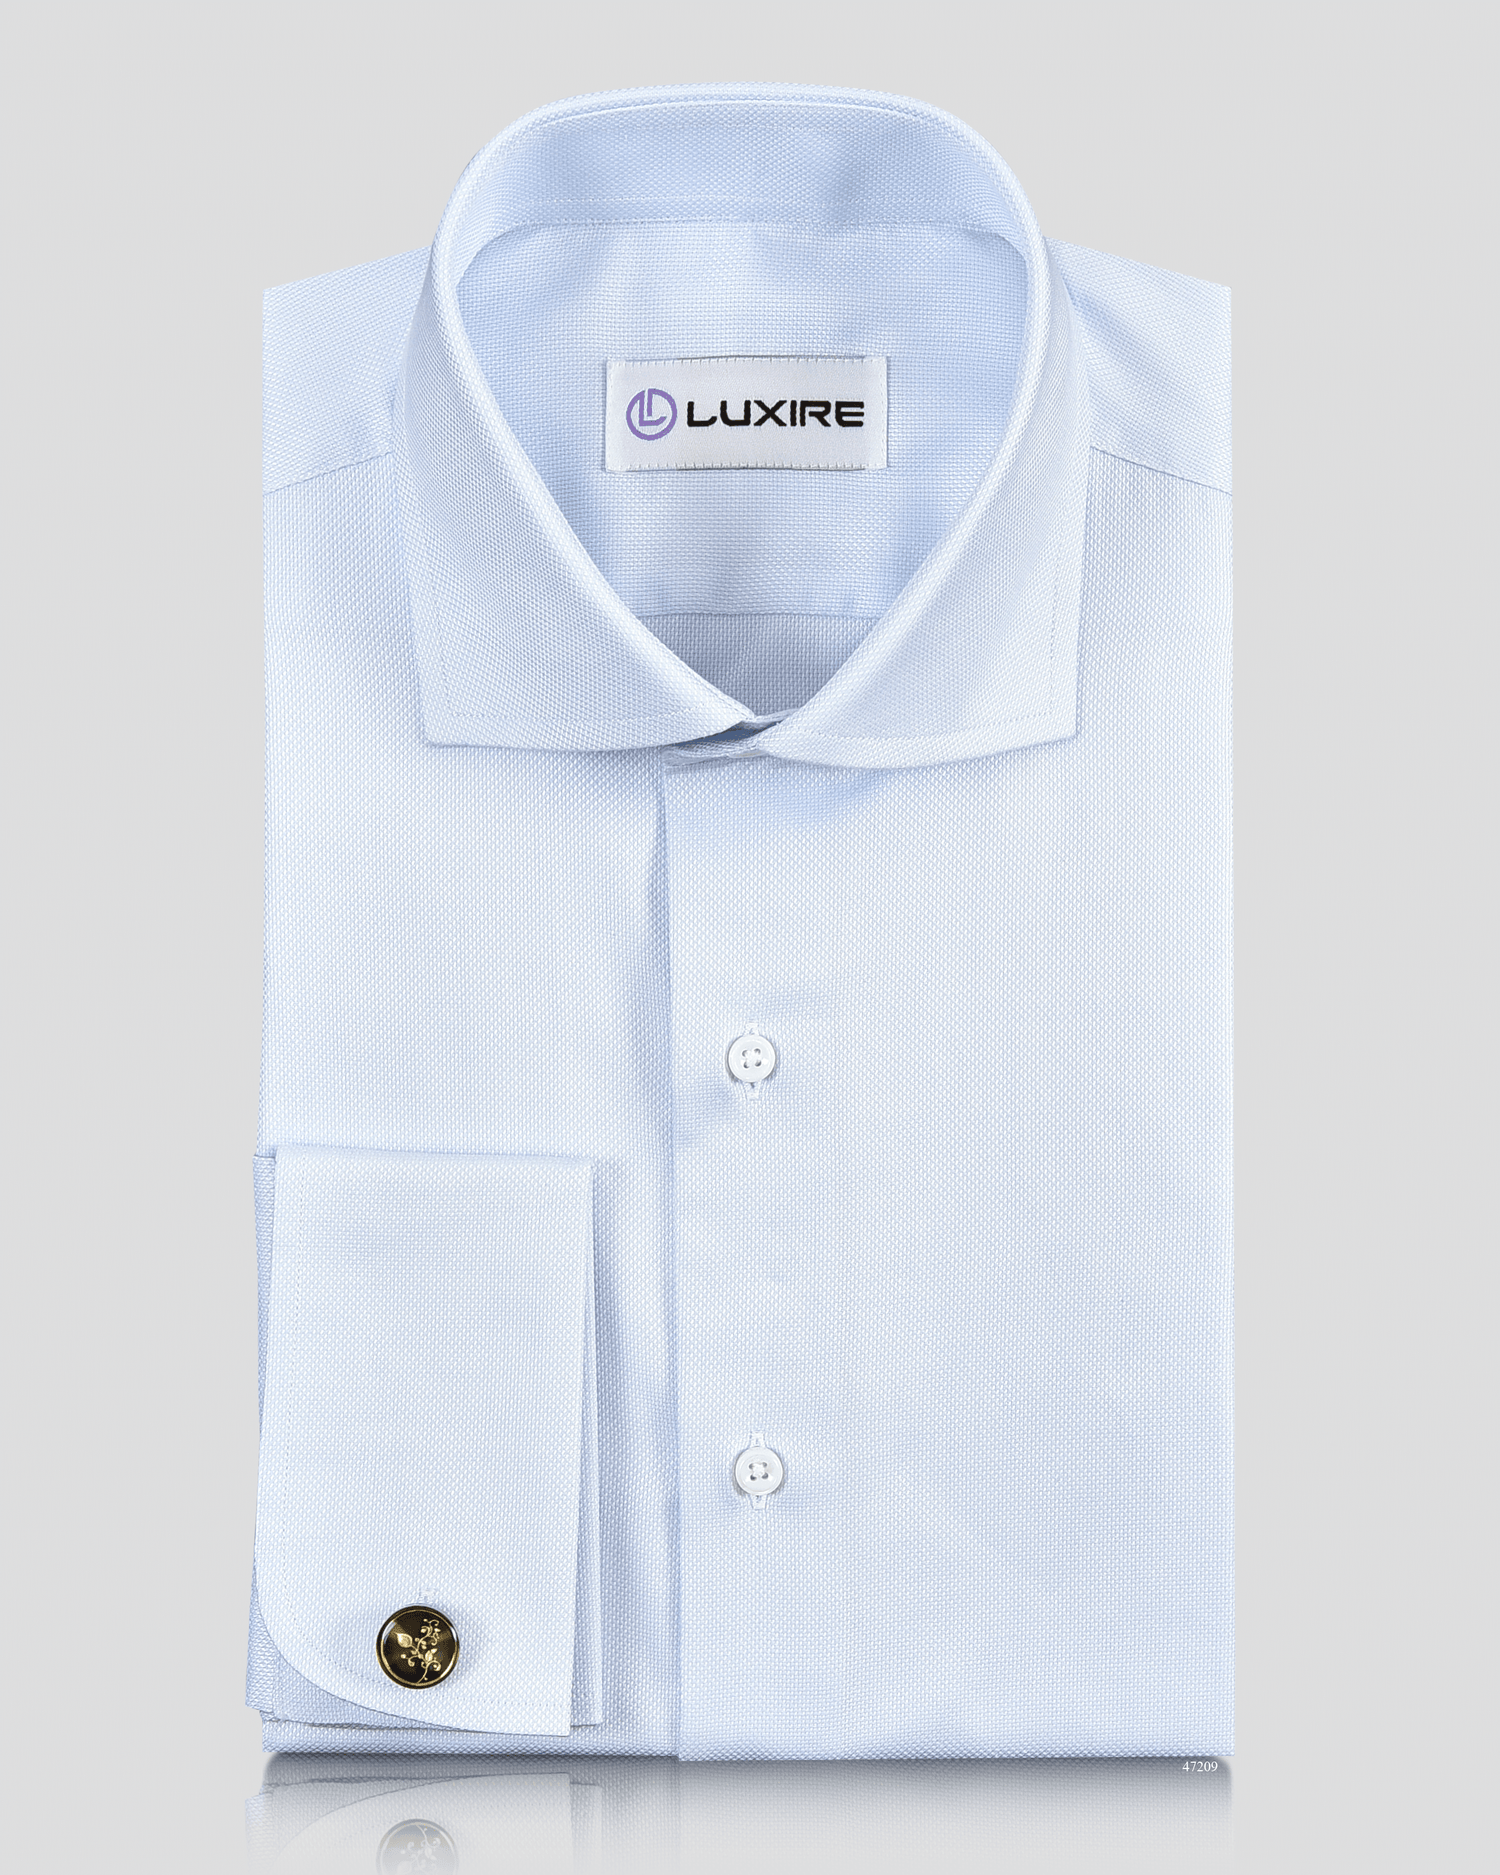 Front of the custom oxford shirt for men by Luxire in business blue